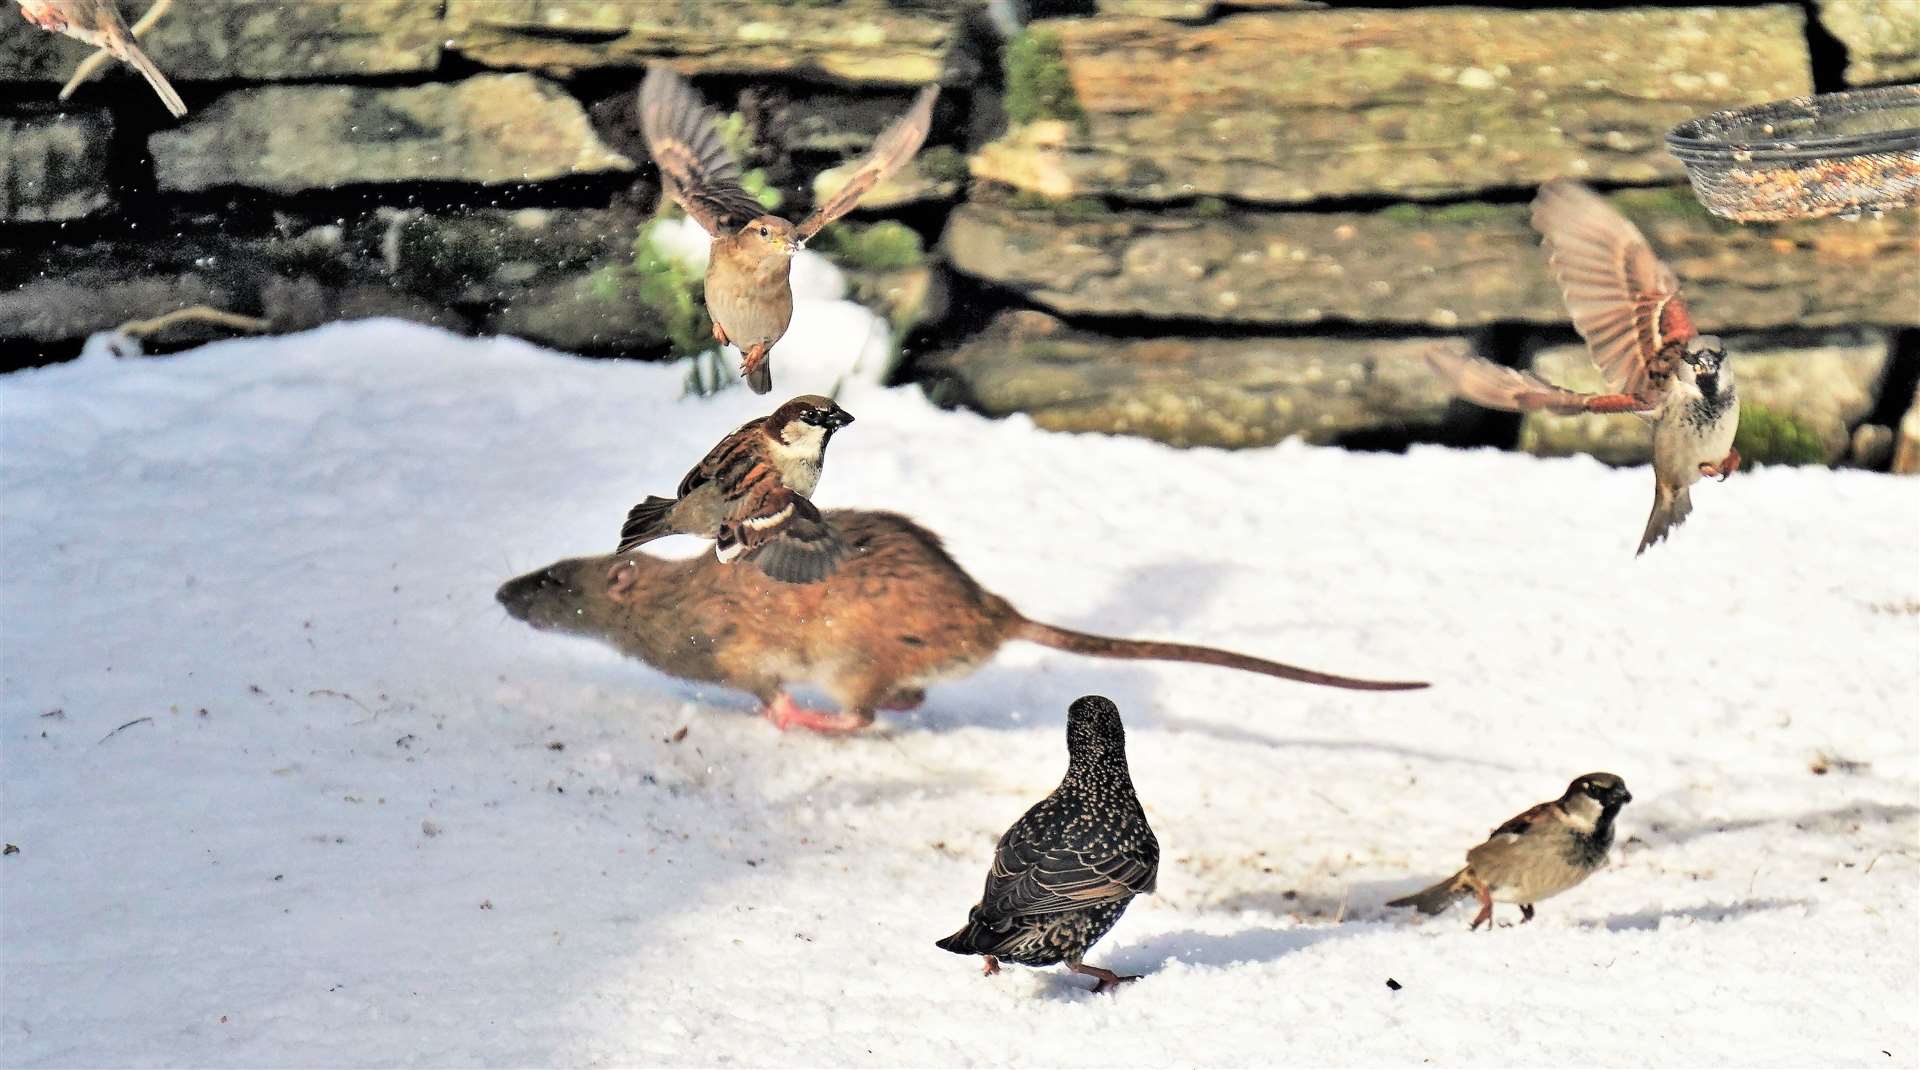 The running rat takes off with some birdseed and a sparrow appears to be taking a ride. Picture: DGS